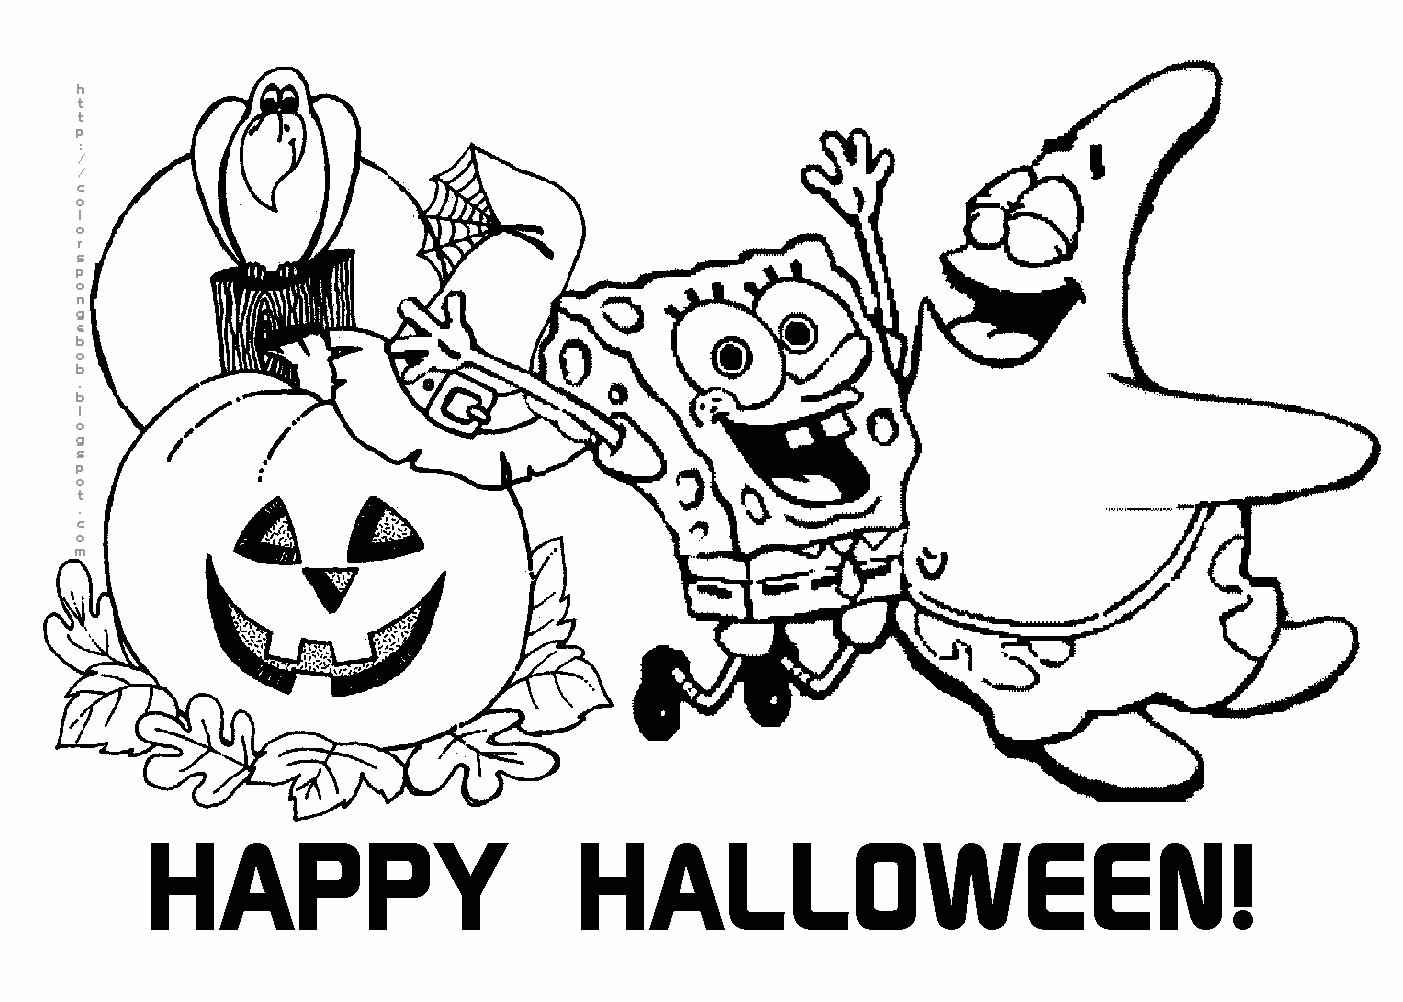 Halloween Coloring Pages Disney : Disney Halloween Coloring Pages Best Coloring Pages For Kids